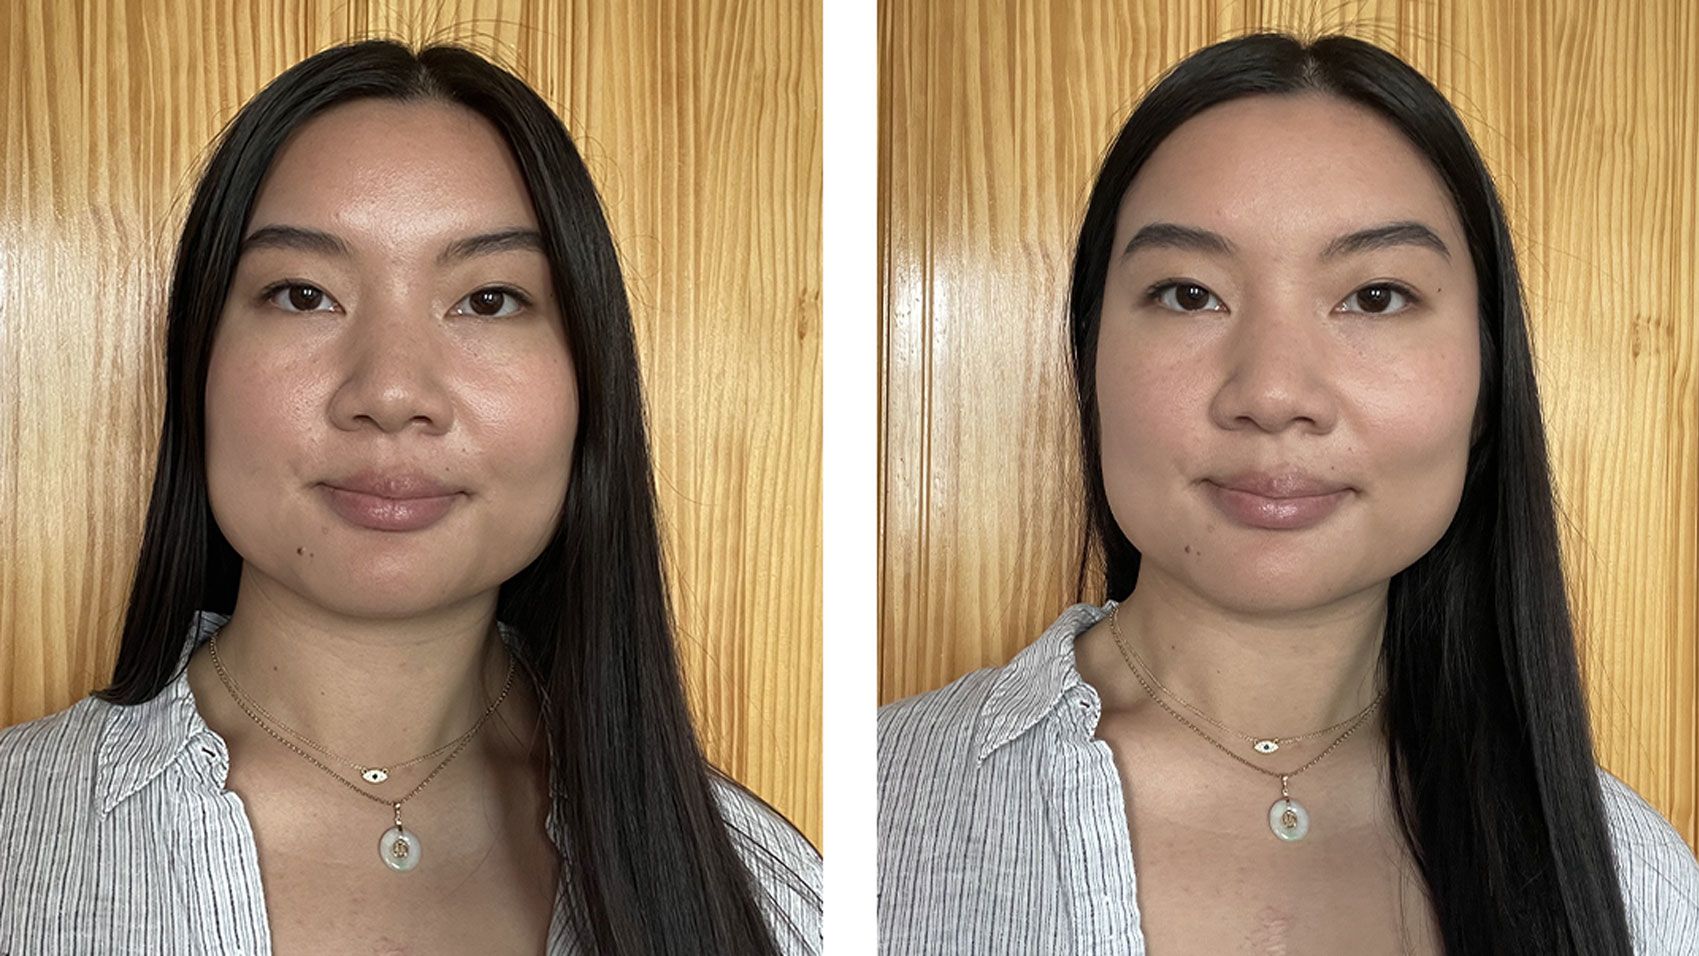 Before applying the Tinted Face Powder in Light (left) and after (right).